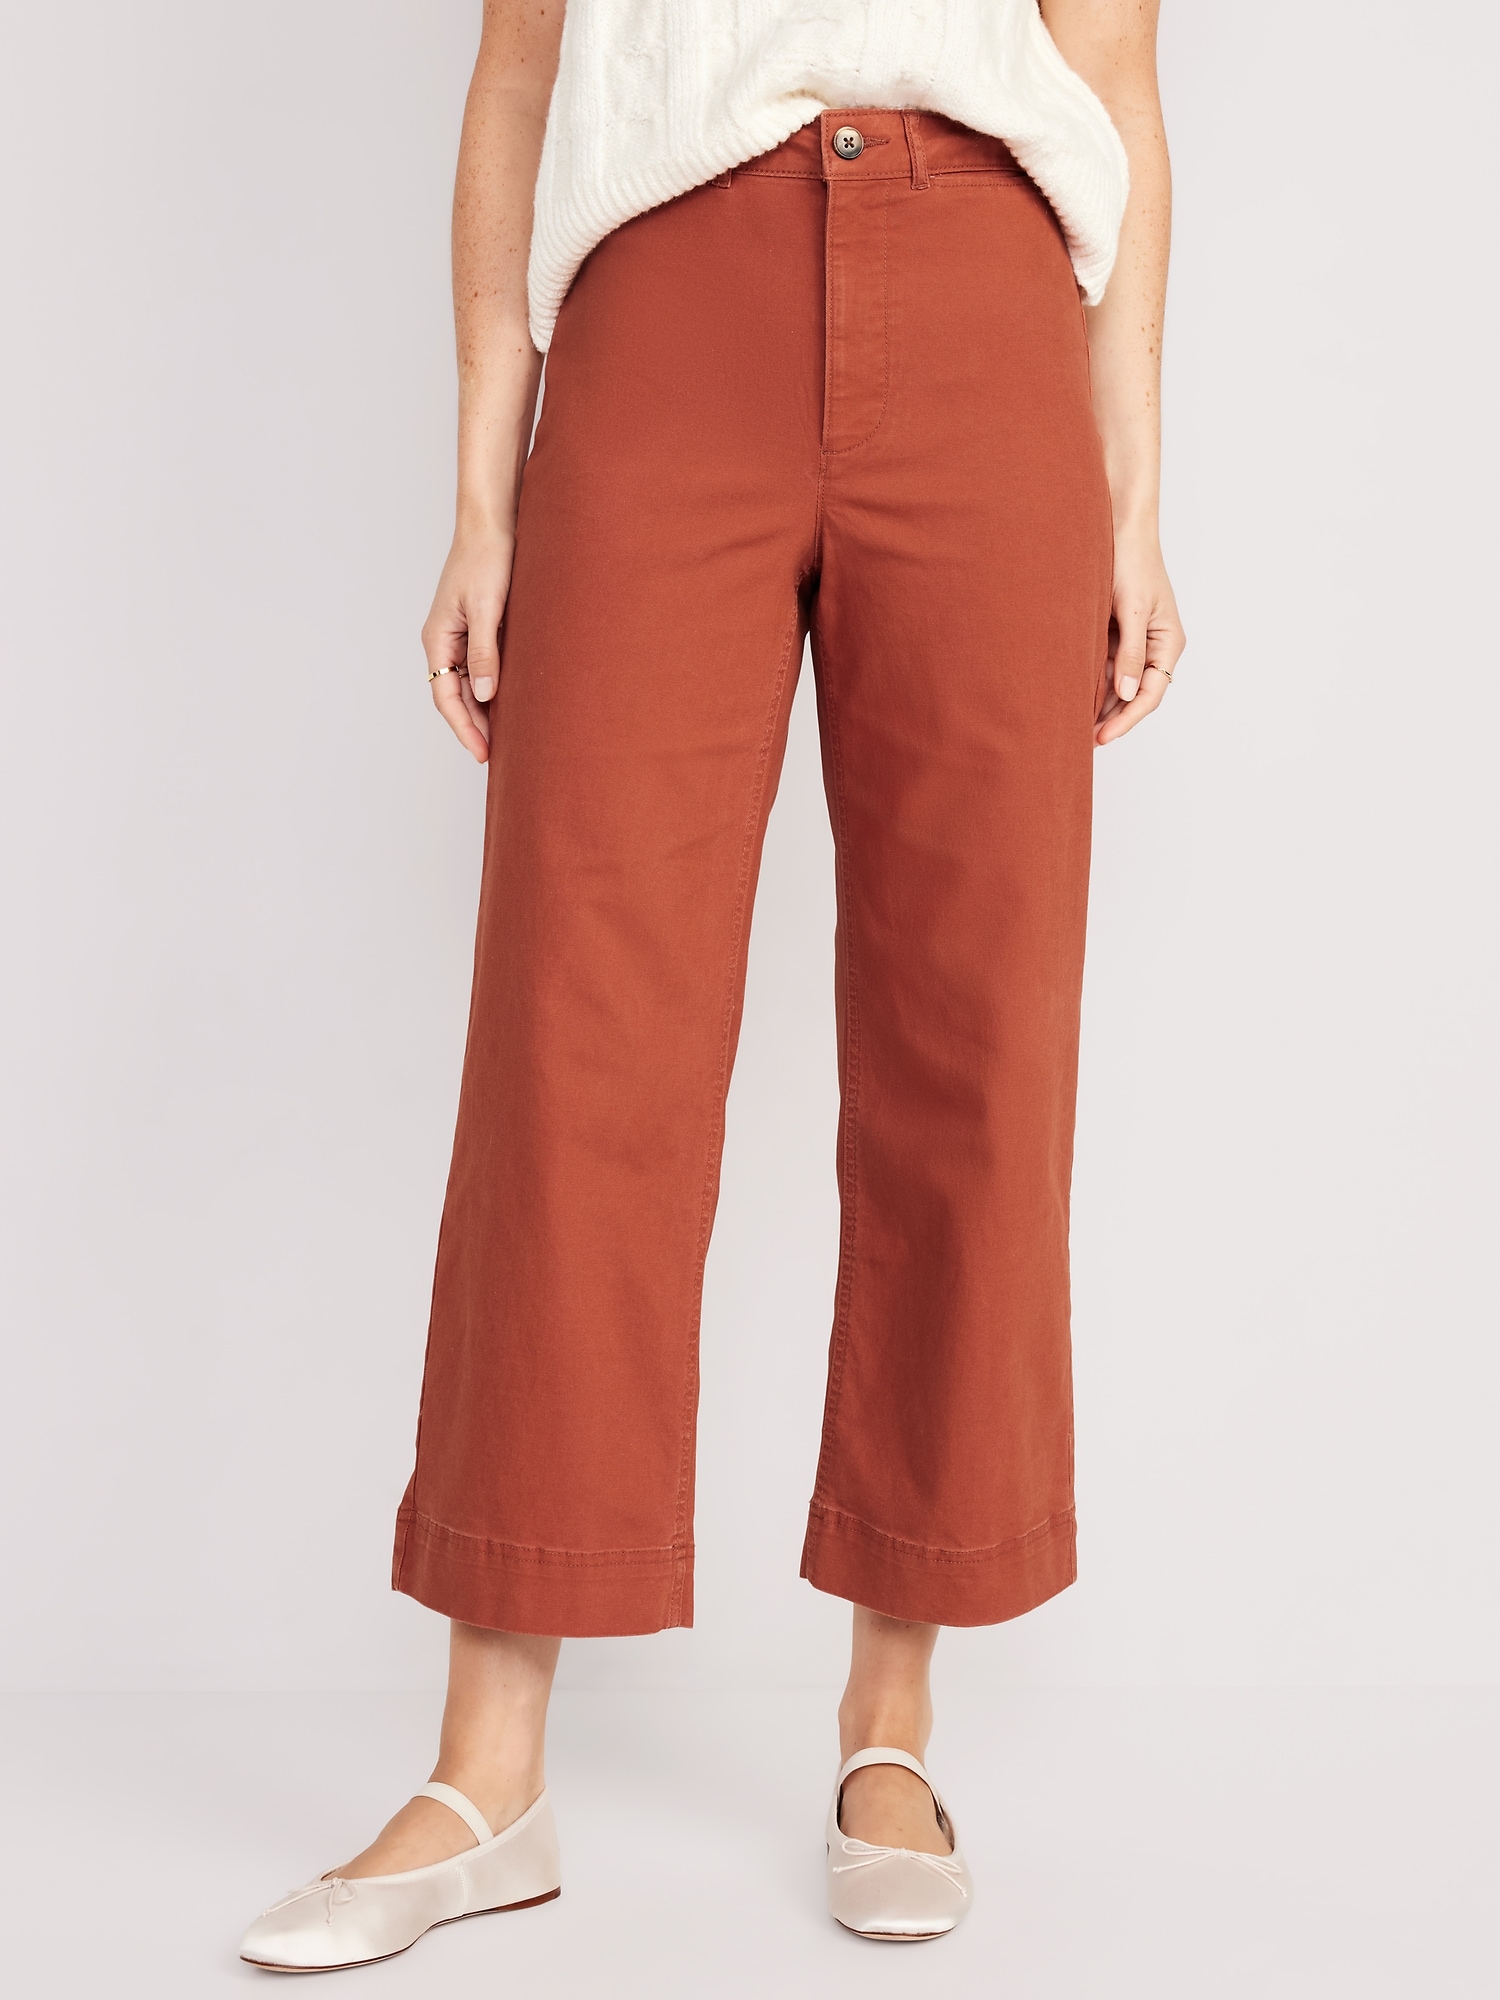 titel automatisk tilgivet High-Waisted Wide-Leg Cropped Chino Pants for Women | Old Navy